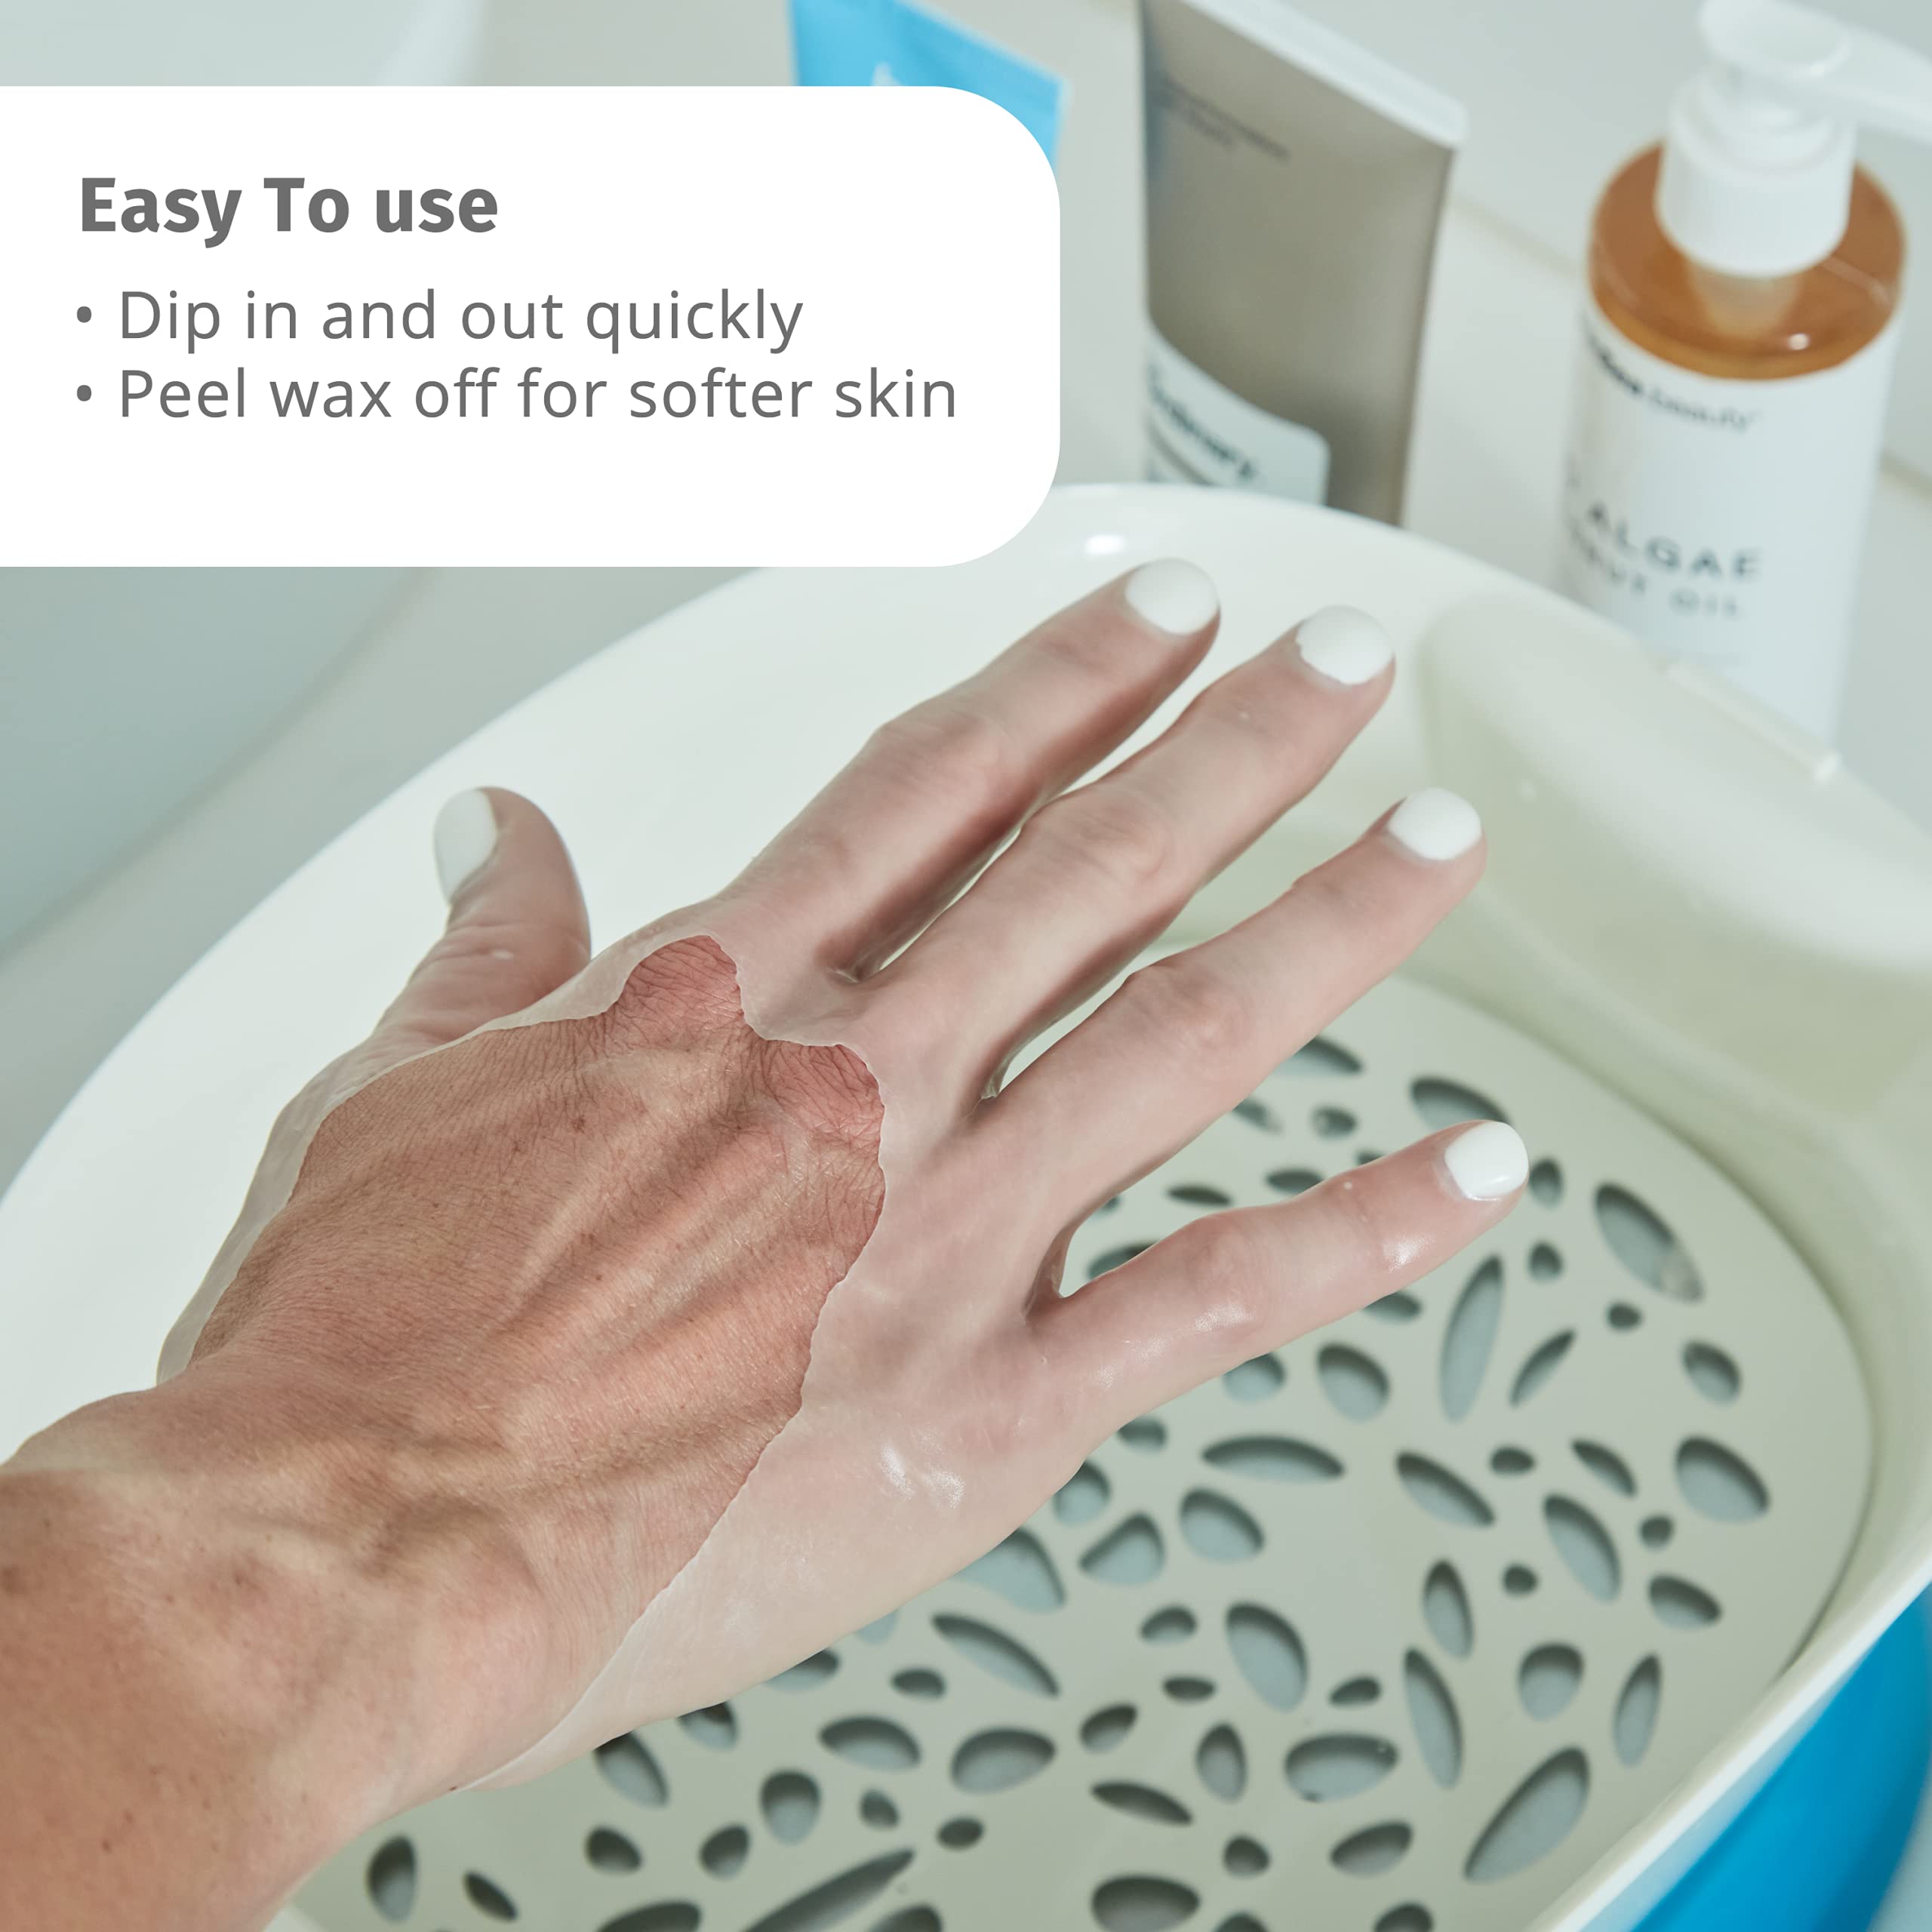 Homedics Paraffin Wax Machine for Hands - Hypoallergenic Hot Wax Hand Therapy Machine to Soothe and Moisturize Hands - Includes 3 Pounds of Wax and 20 Hand Liners